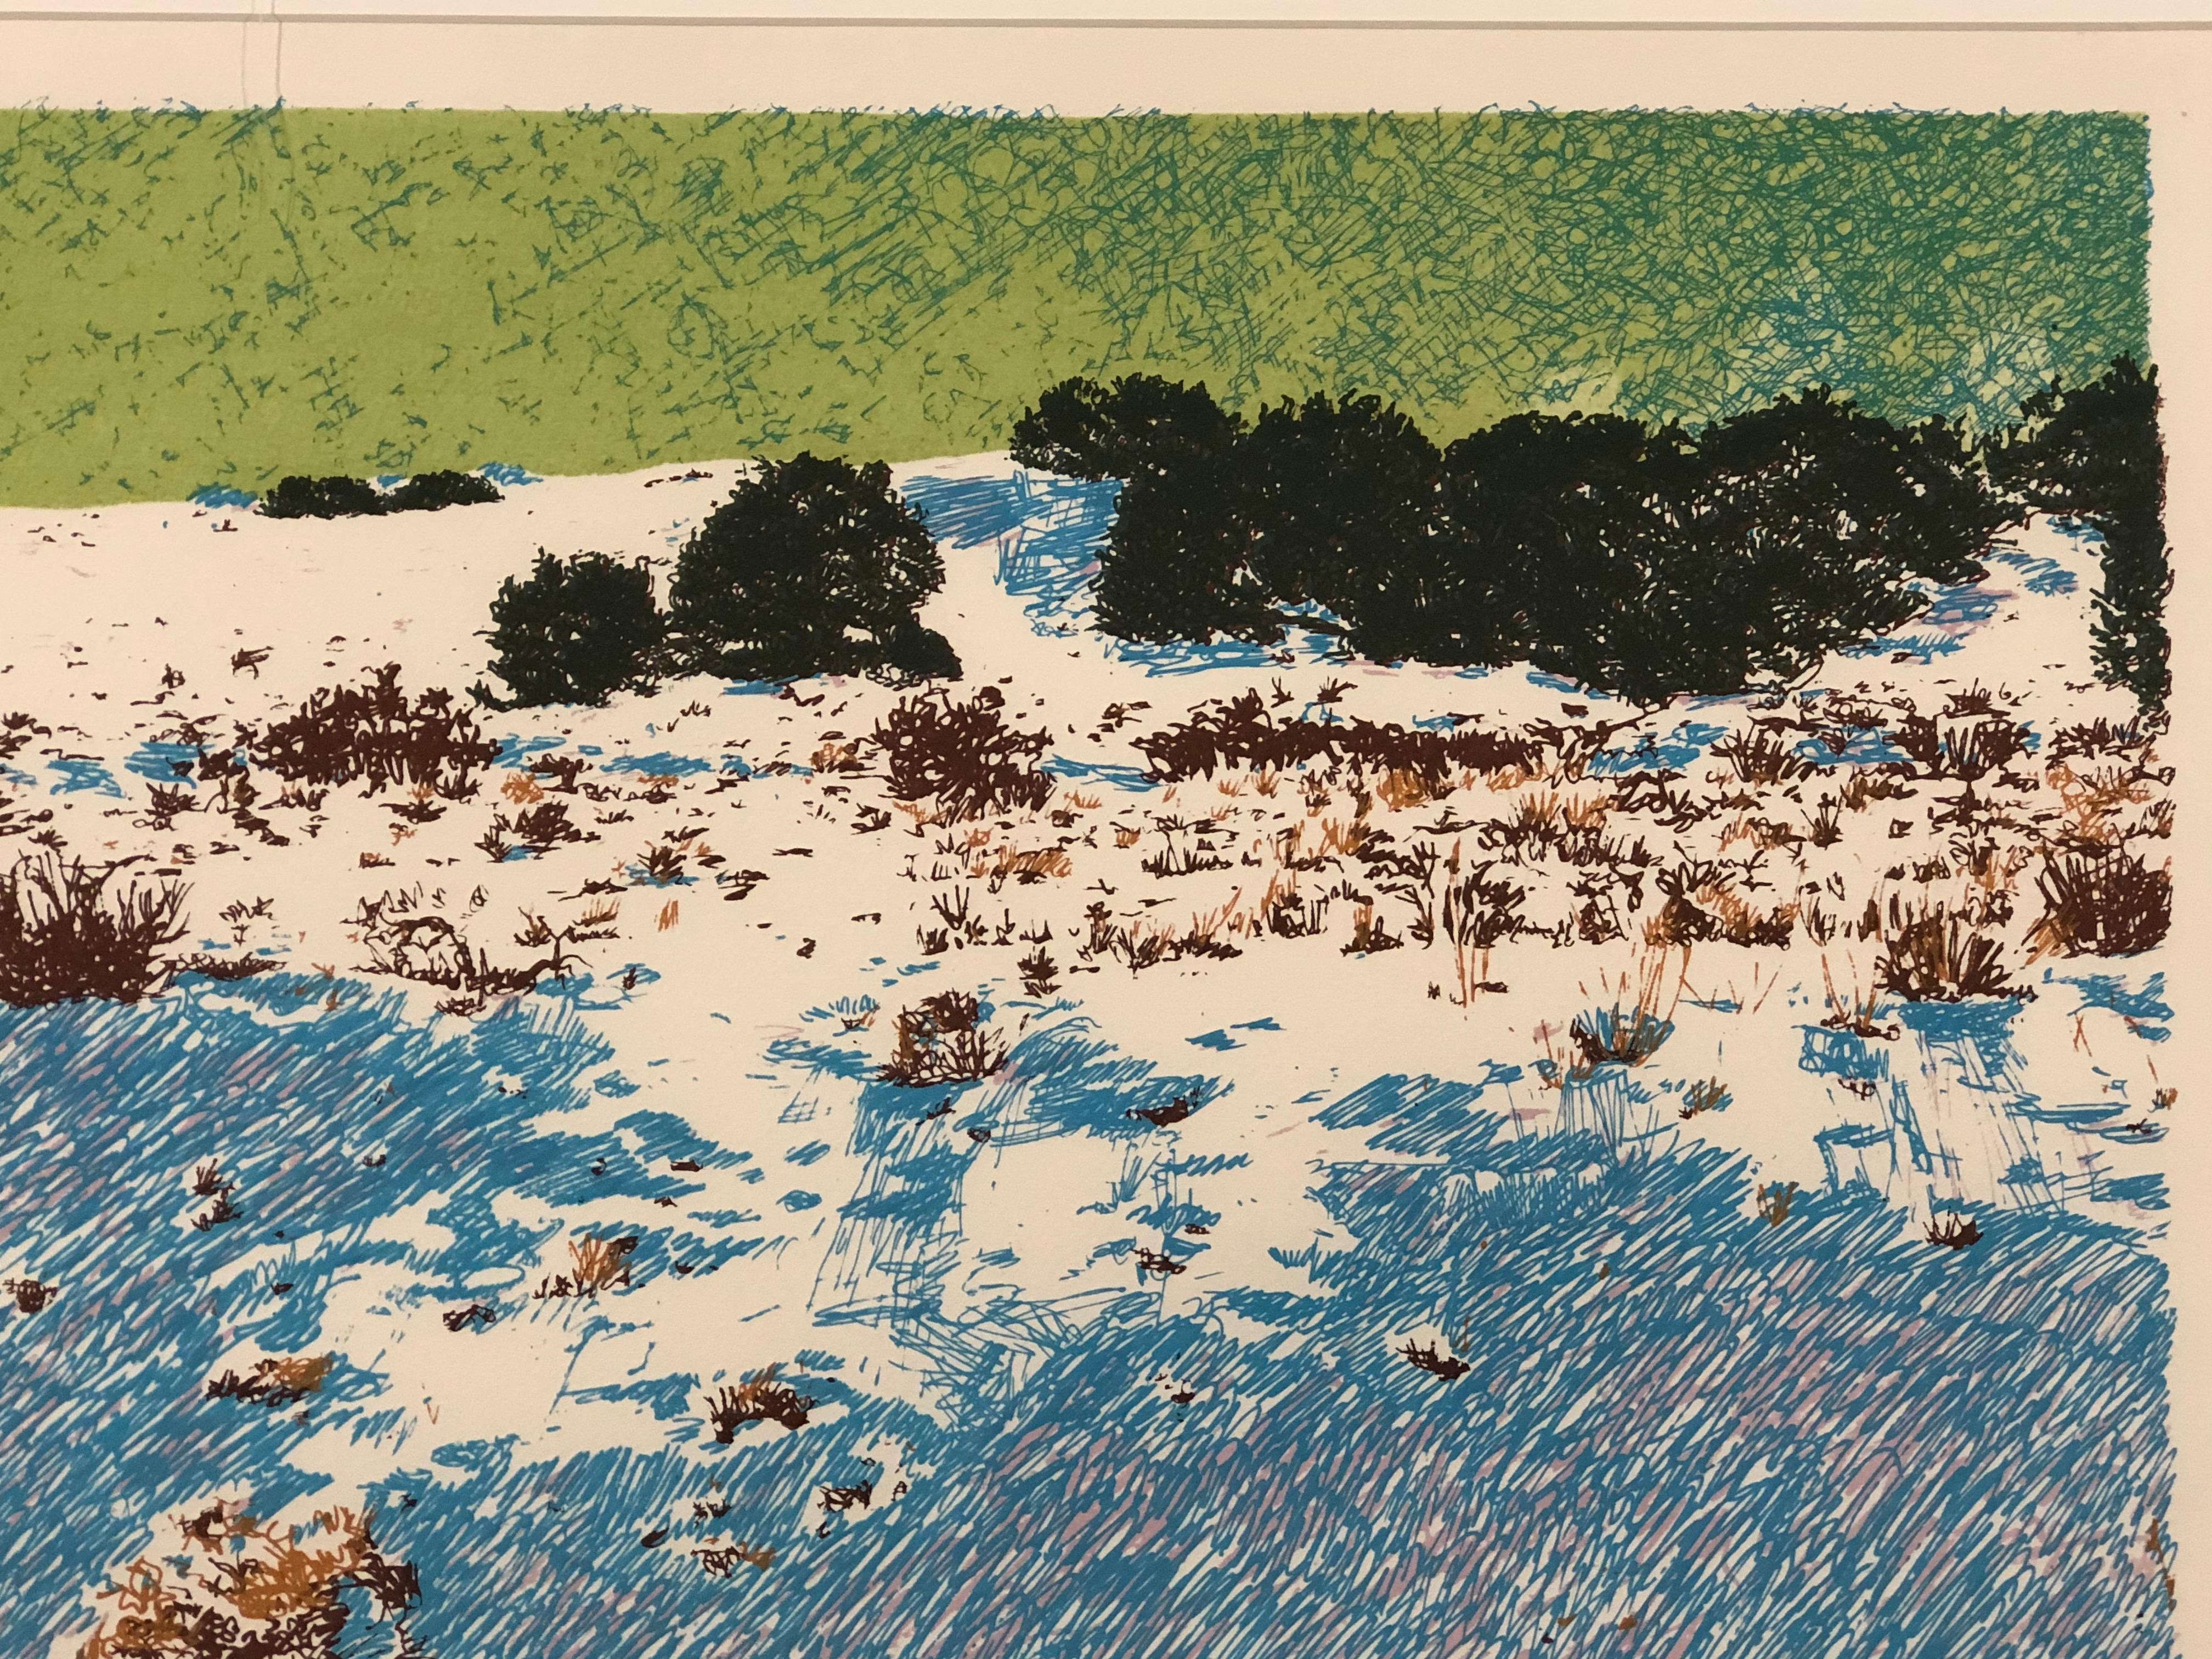 Prairie Winter, Cerrillos Flats by John Hogan serigraph New Mexico Landscape
brown, white, blue, pink
limited edition framed serigraph 2/20 © 1979

John Hogan A graduate of Northeast Louisiana State University with a bachelor's degree and New Mexico